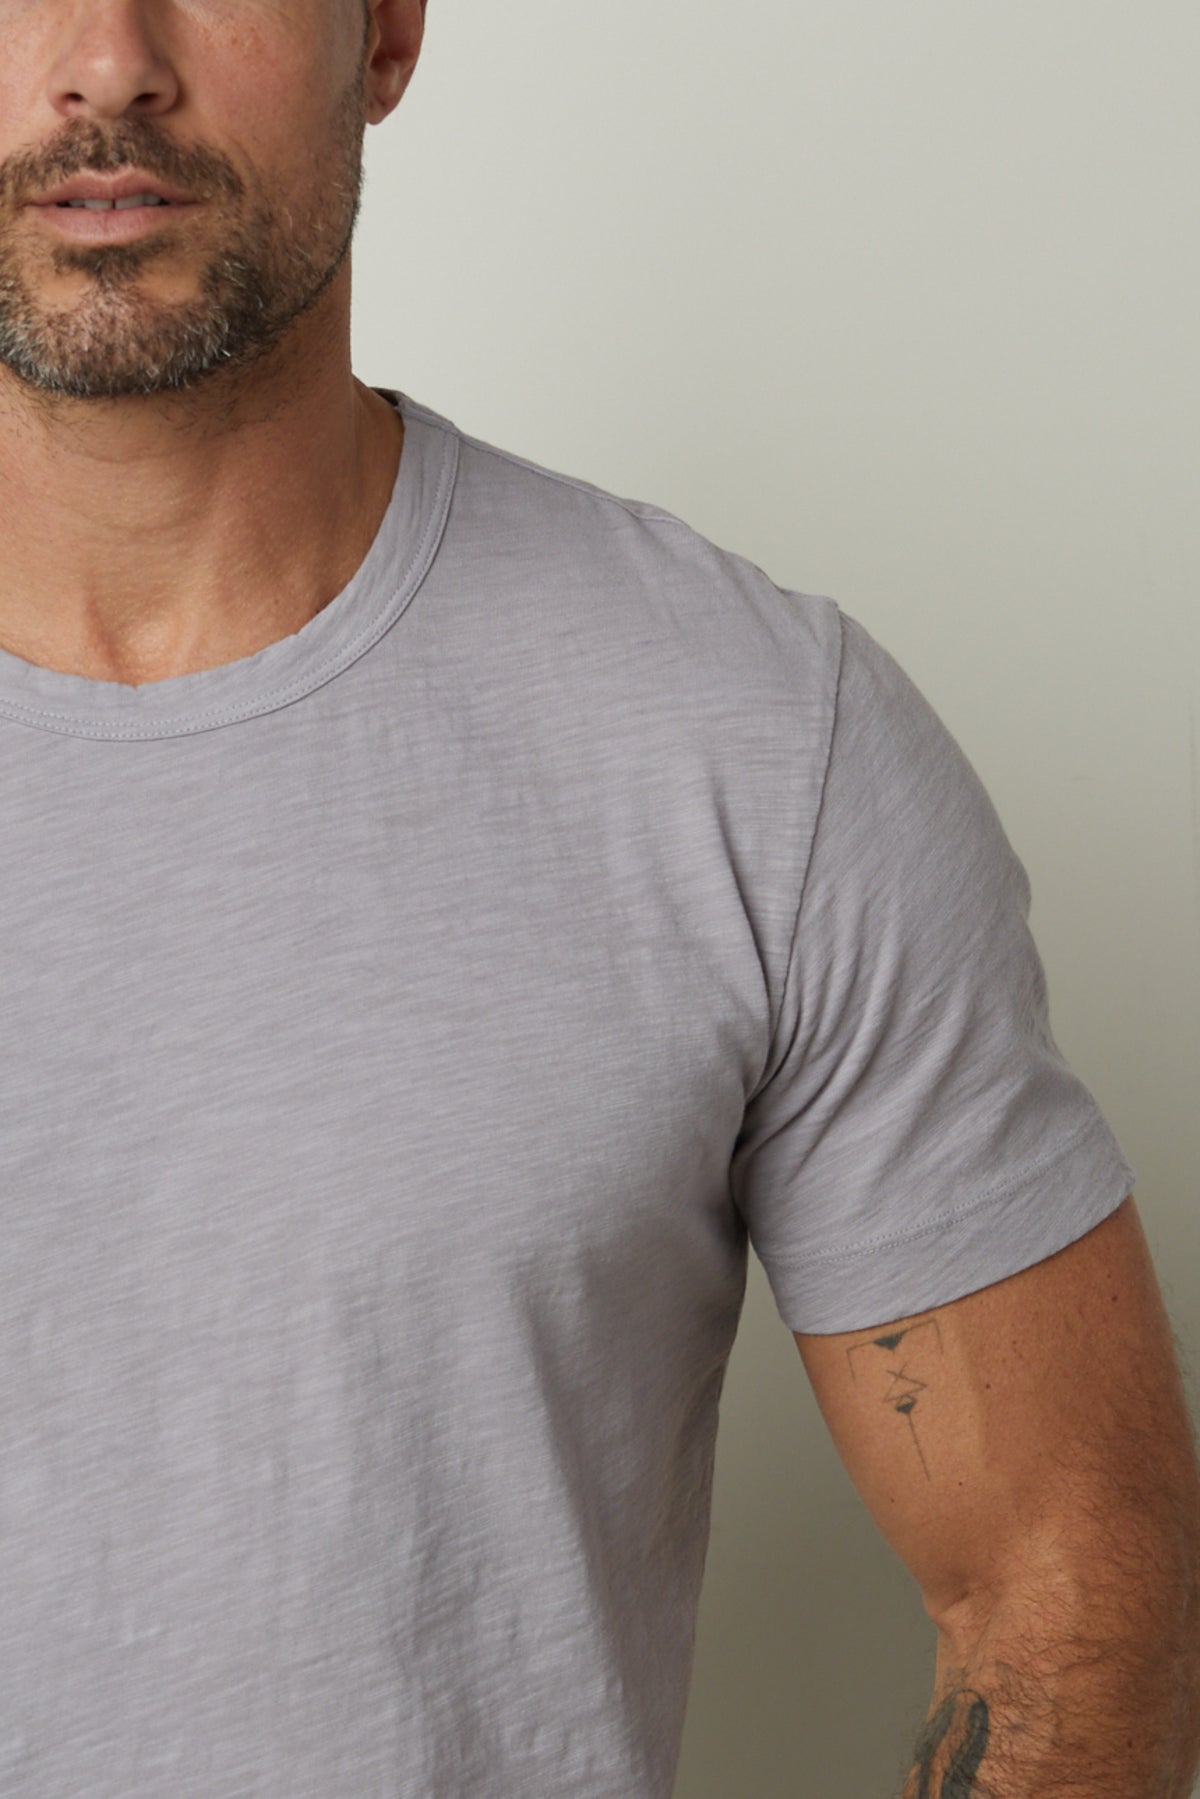 A man with a trimmed beard is wearing a light gray, cotton slub knit AMARO TEE by Velvet by Graham & Spencer, standing against a plain background. His left arm displays a tattoo.-37229768835265